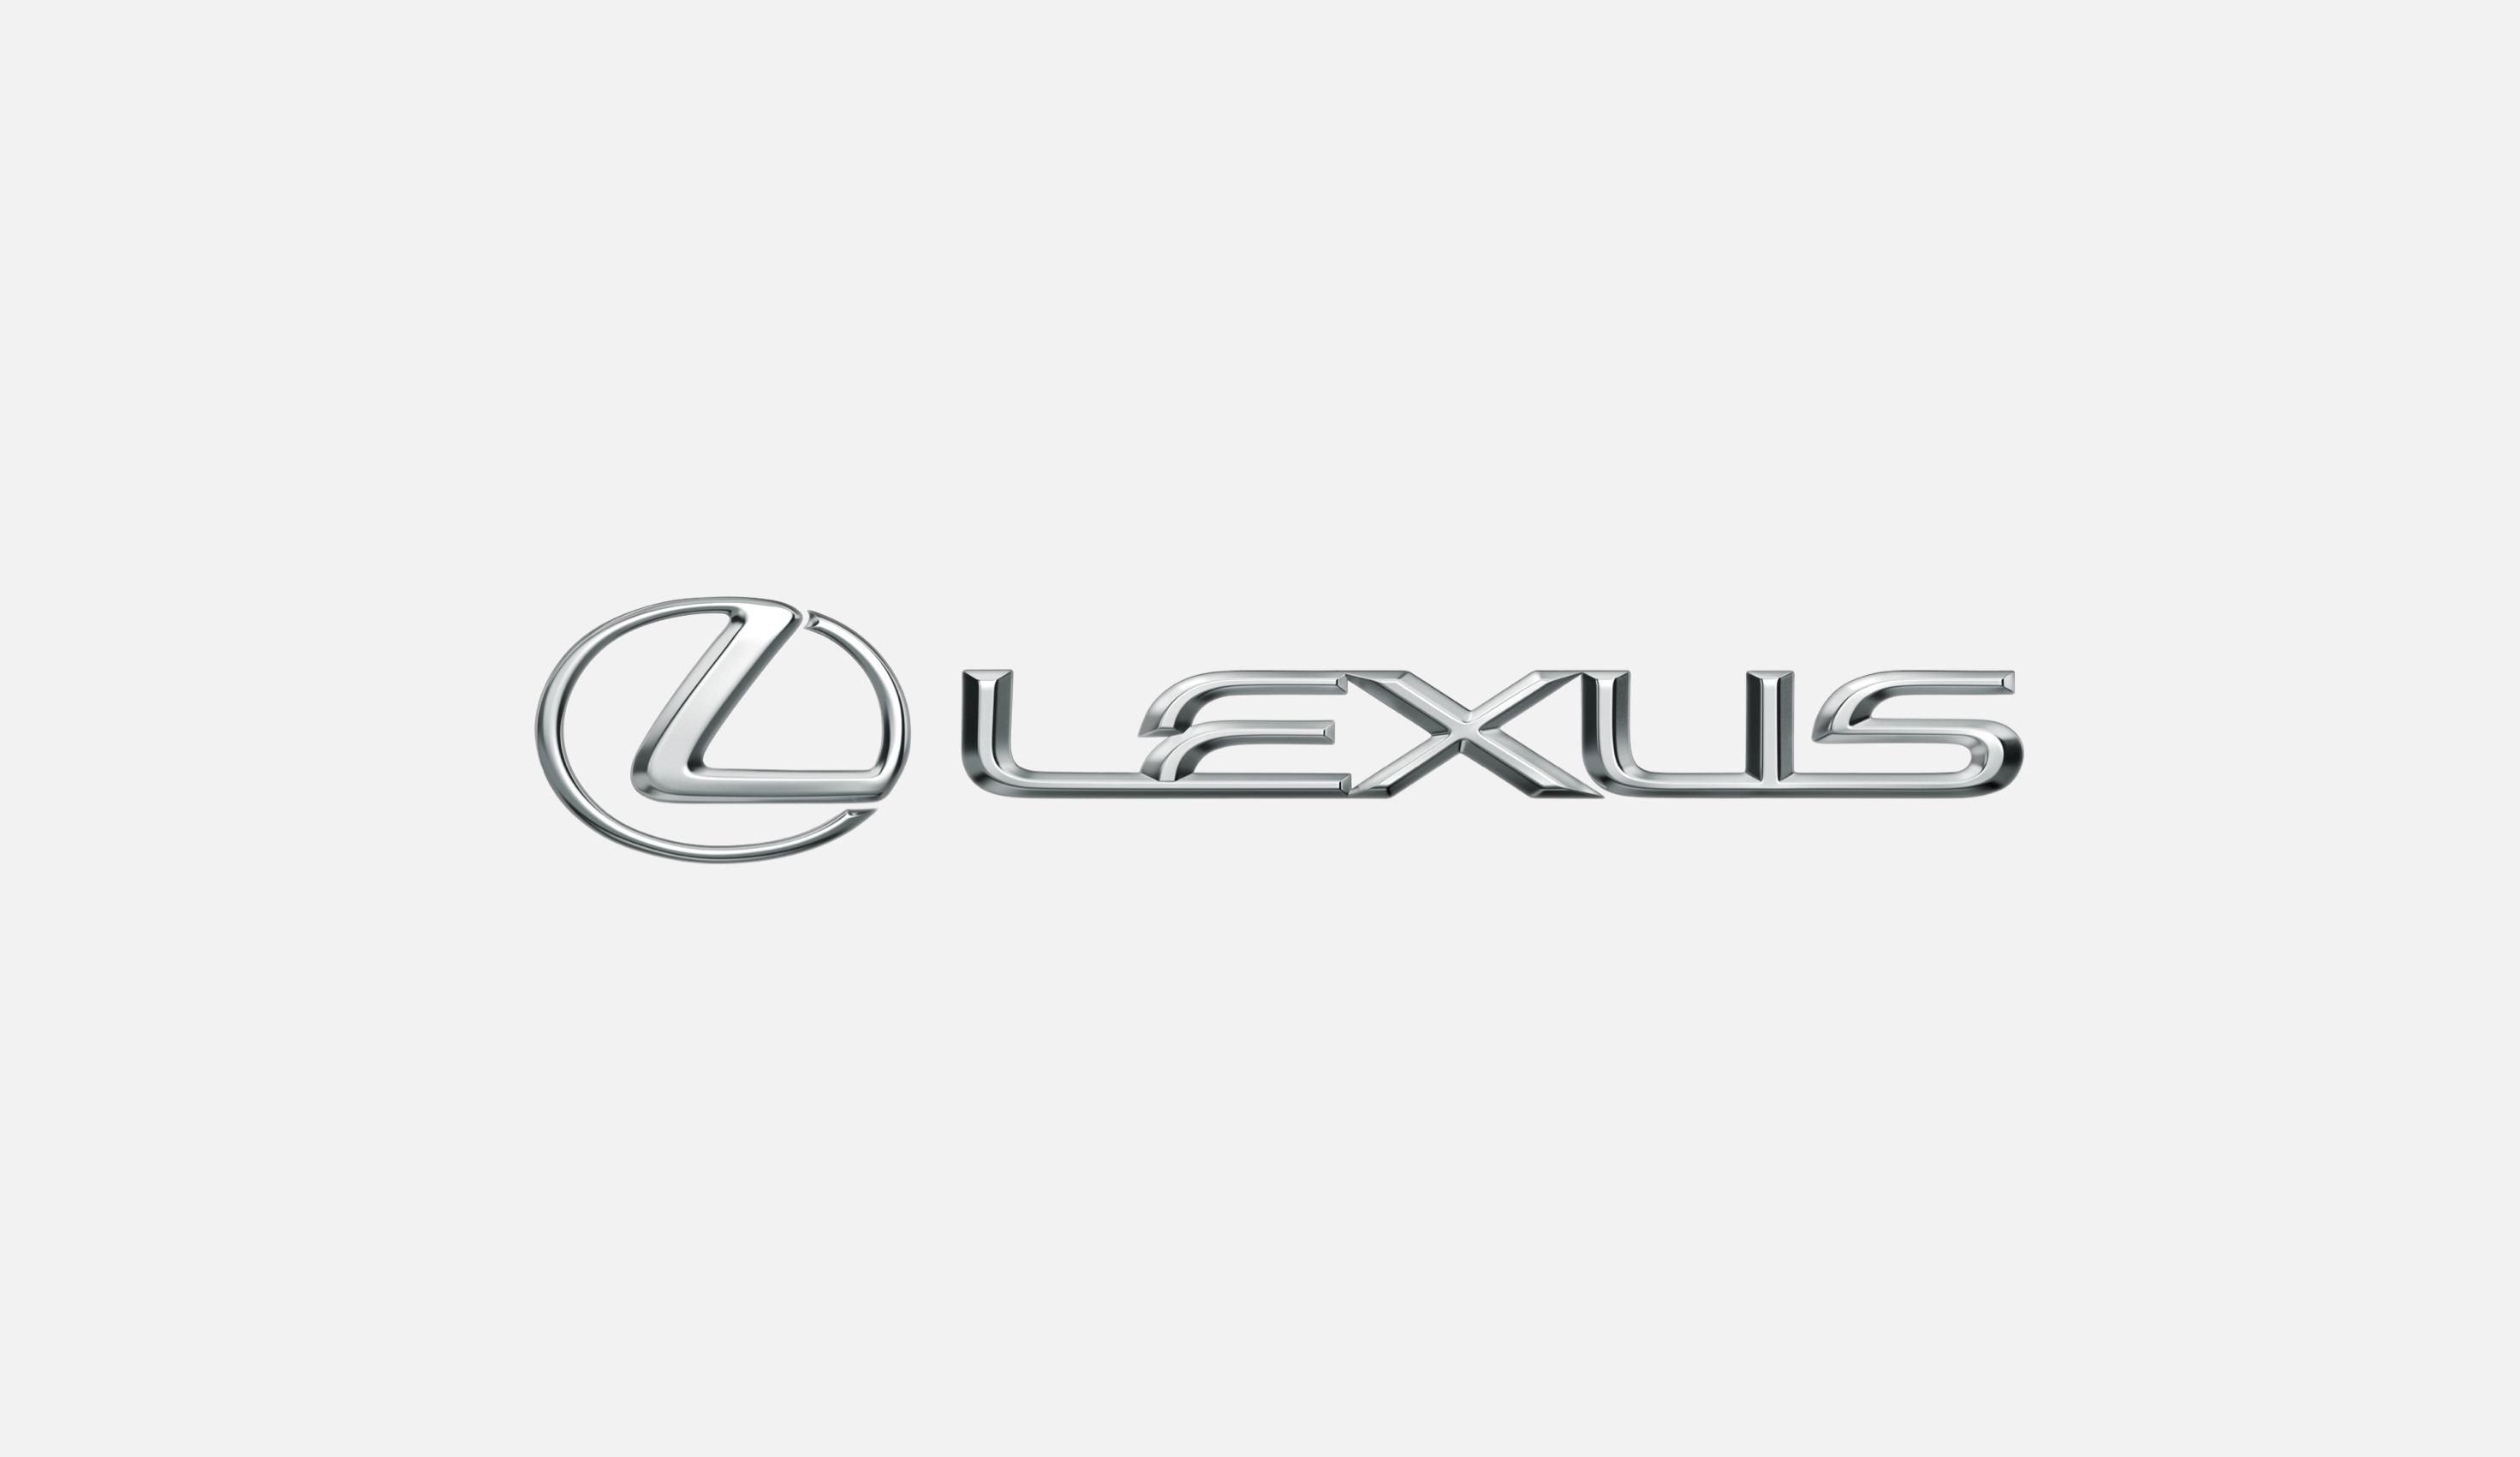 2016 Lexus LX and LS Commercial – ‘Different Routes’